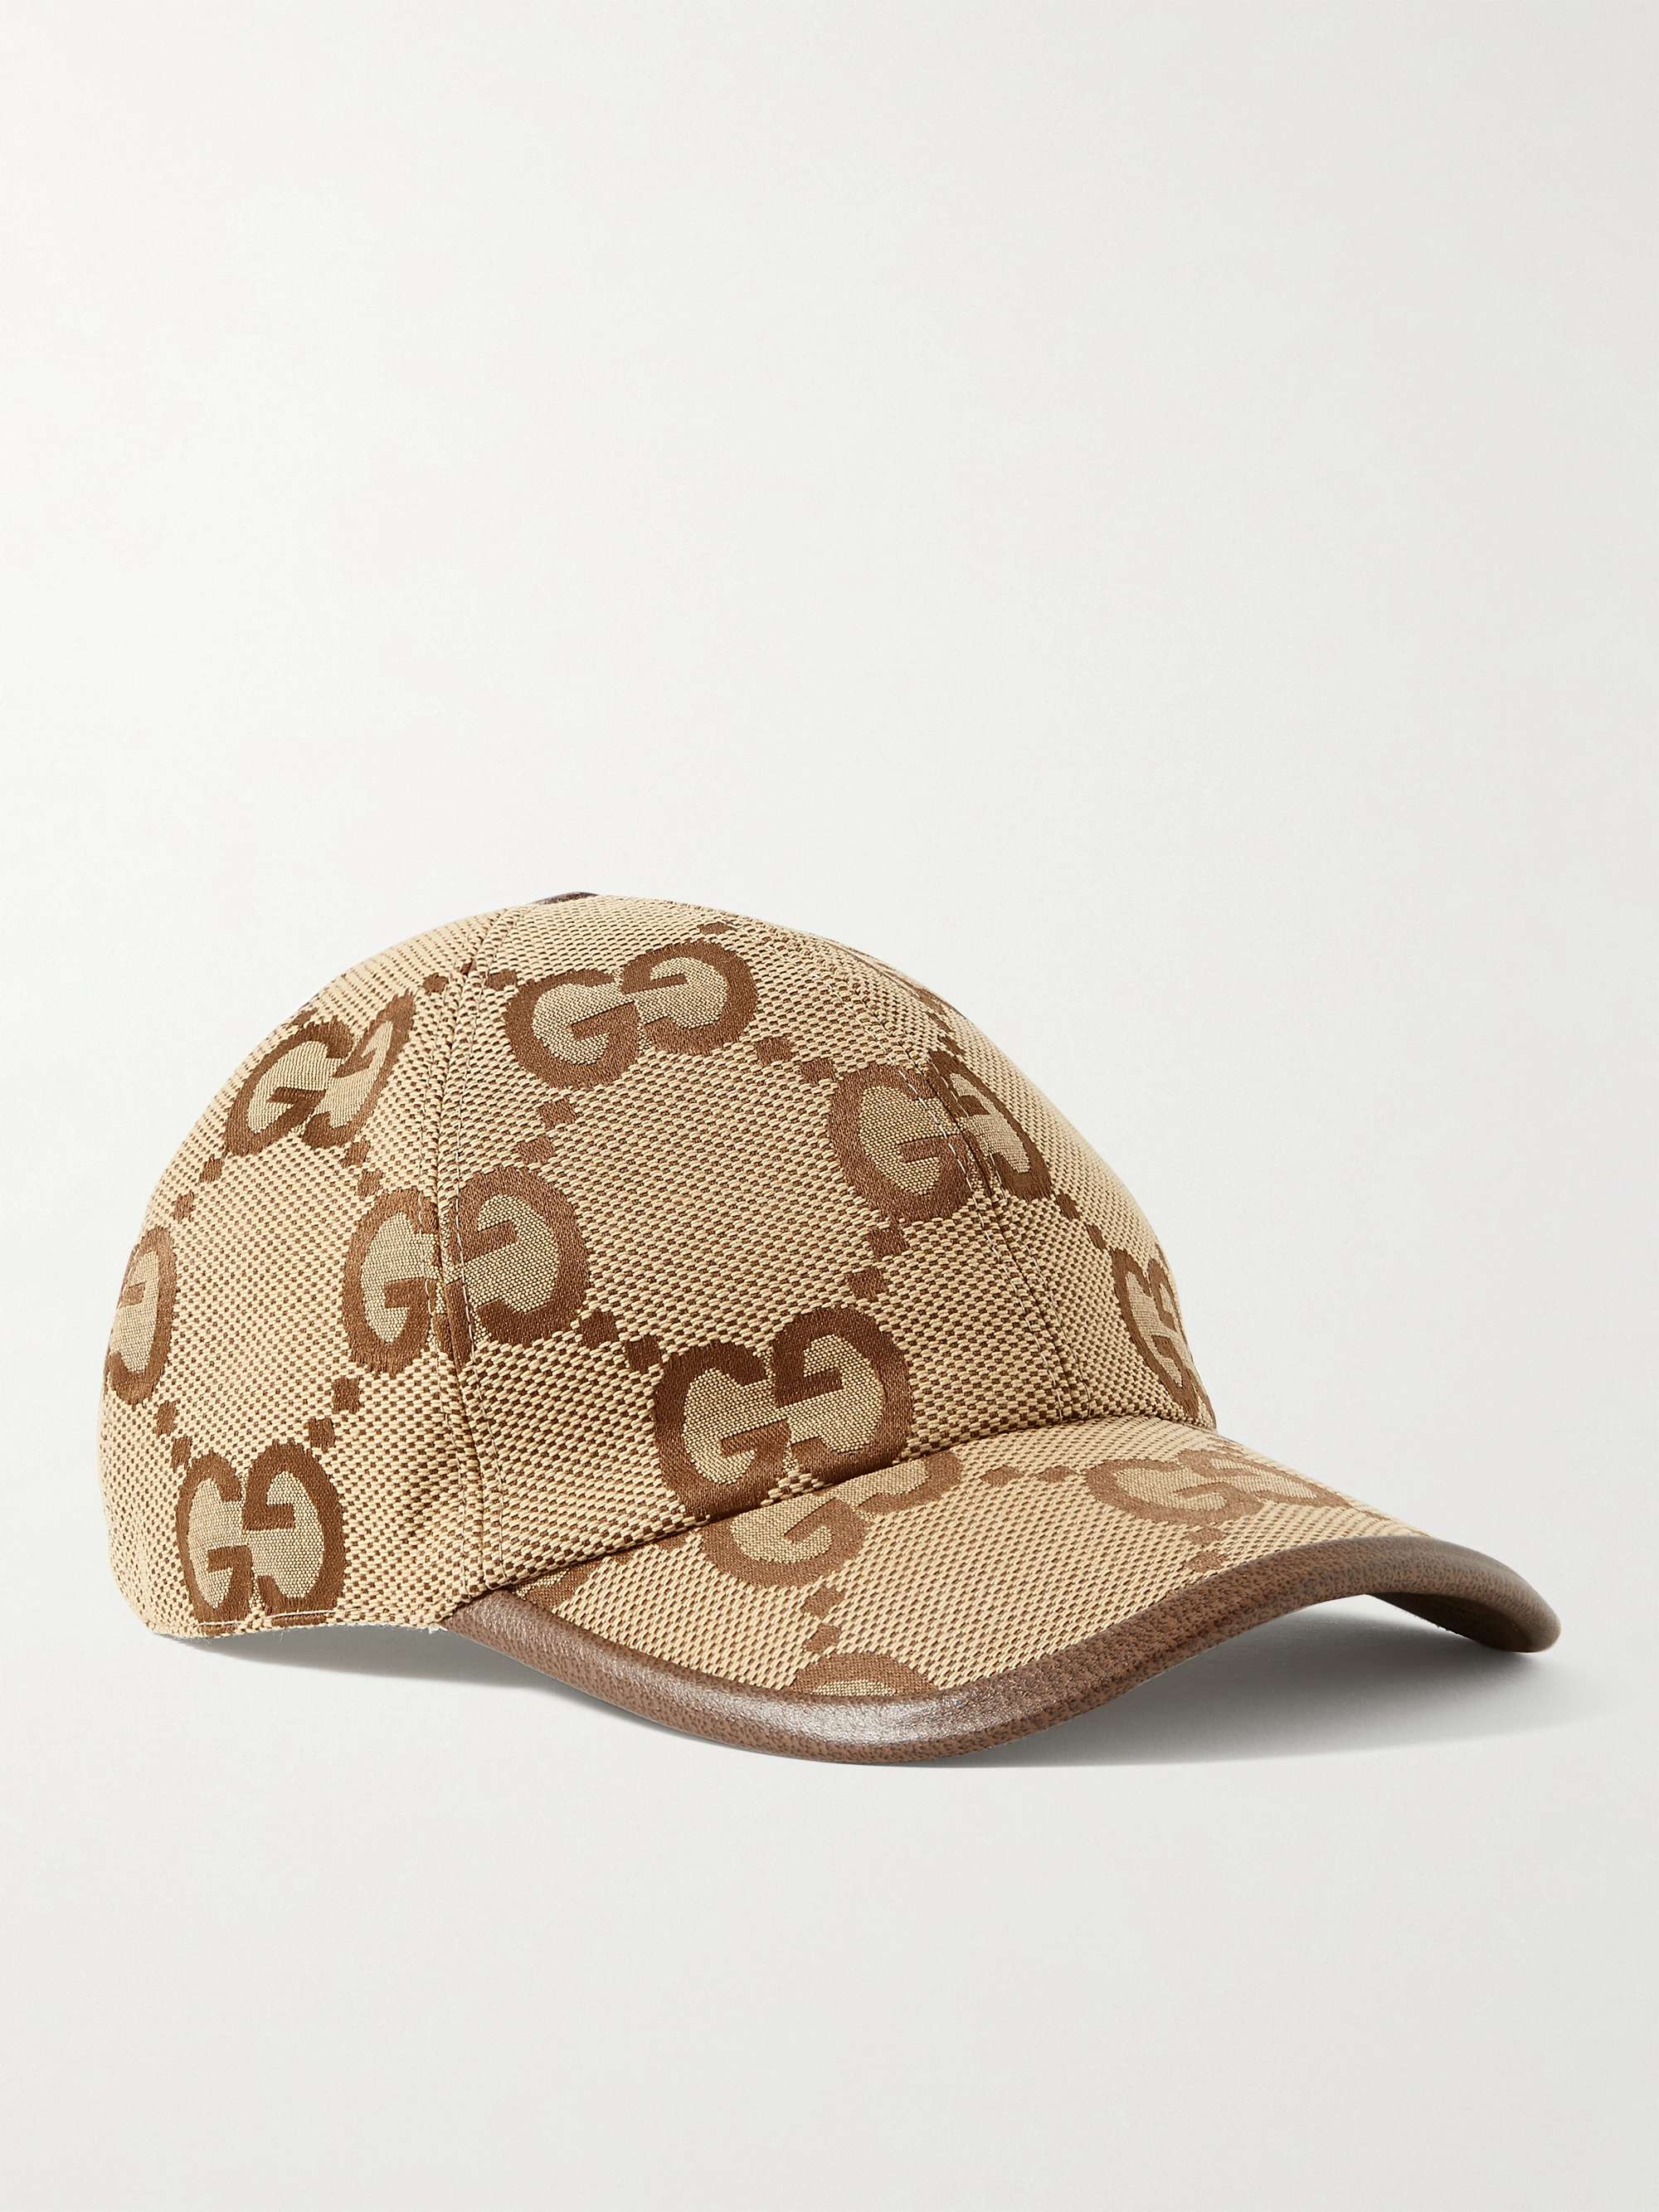 GUCCI Leather-Trimmed Monogrammed Canvas Baseball Cap